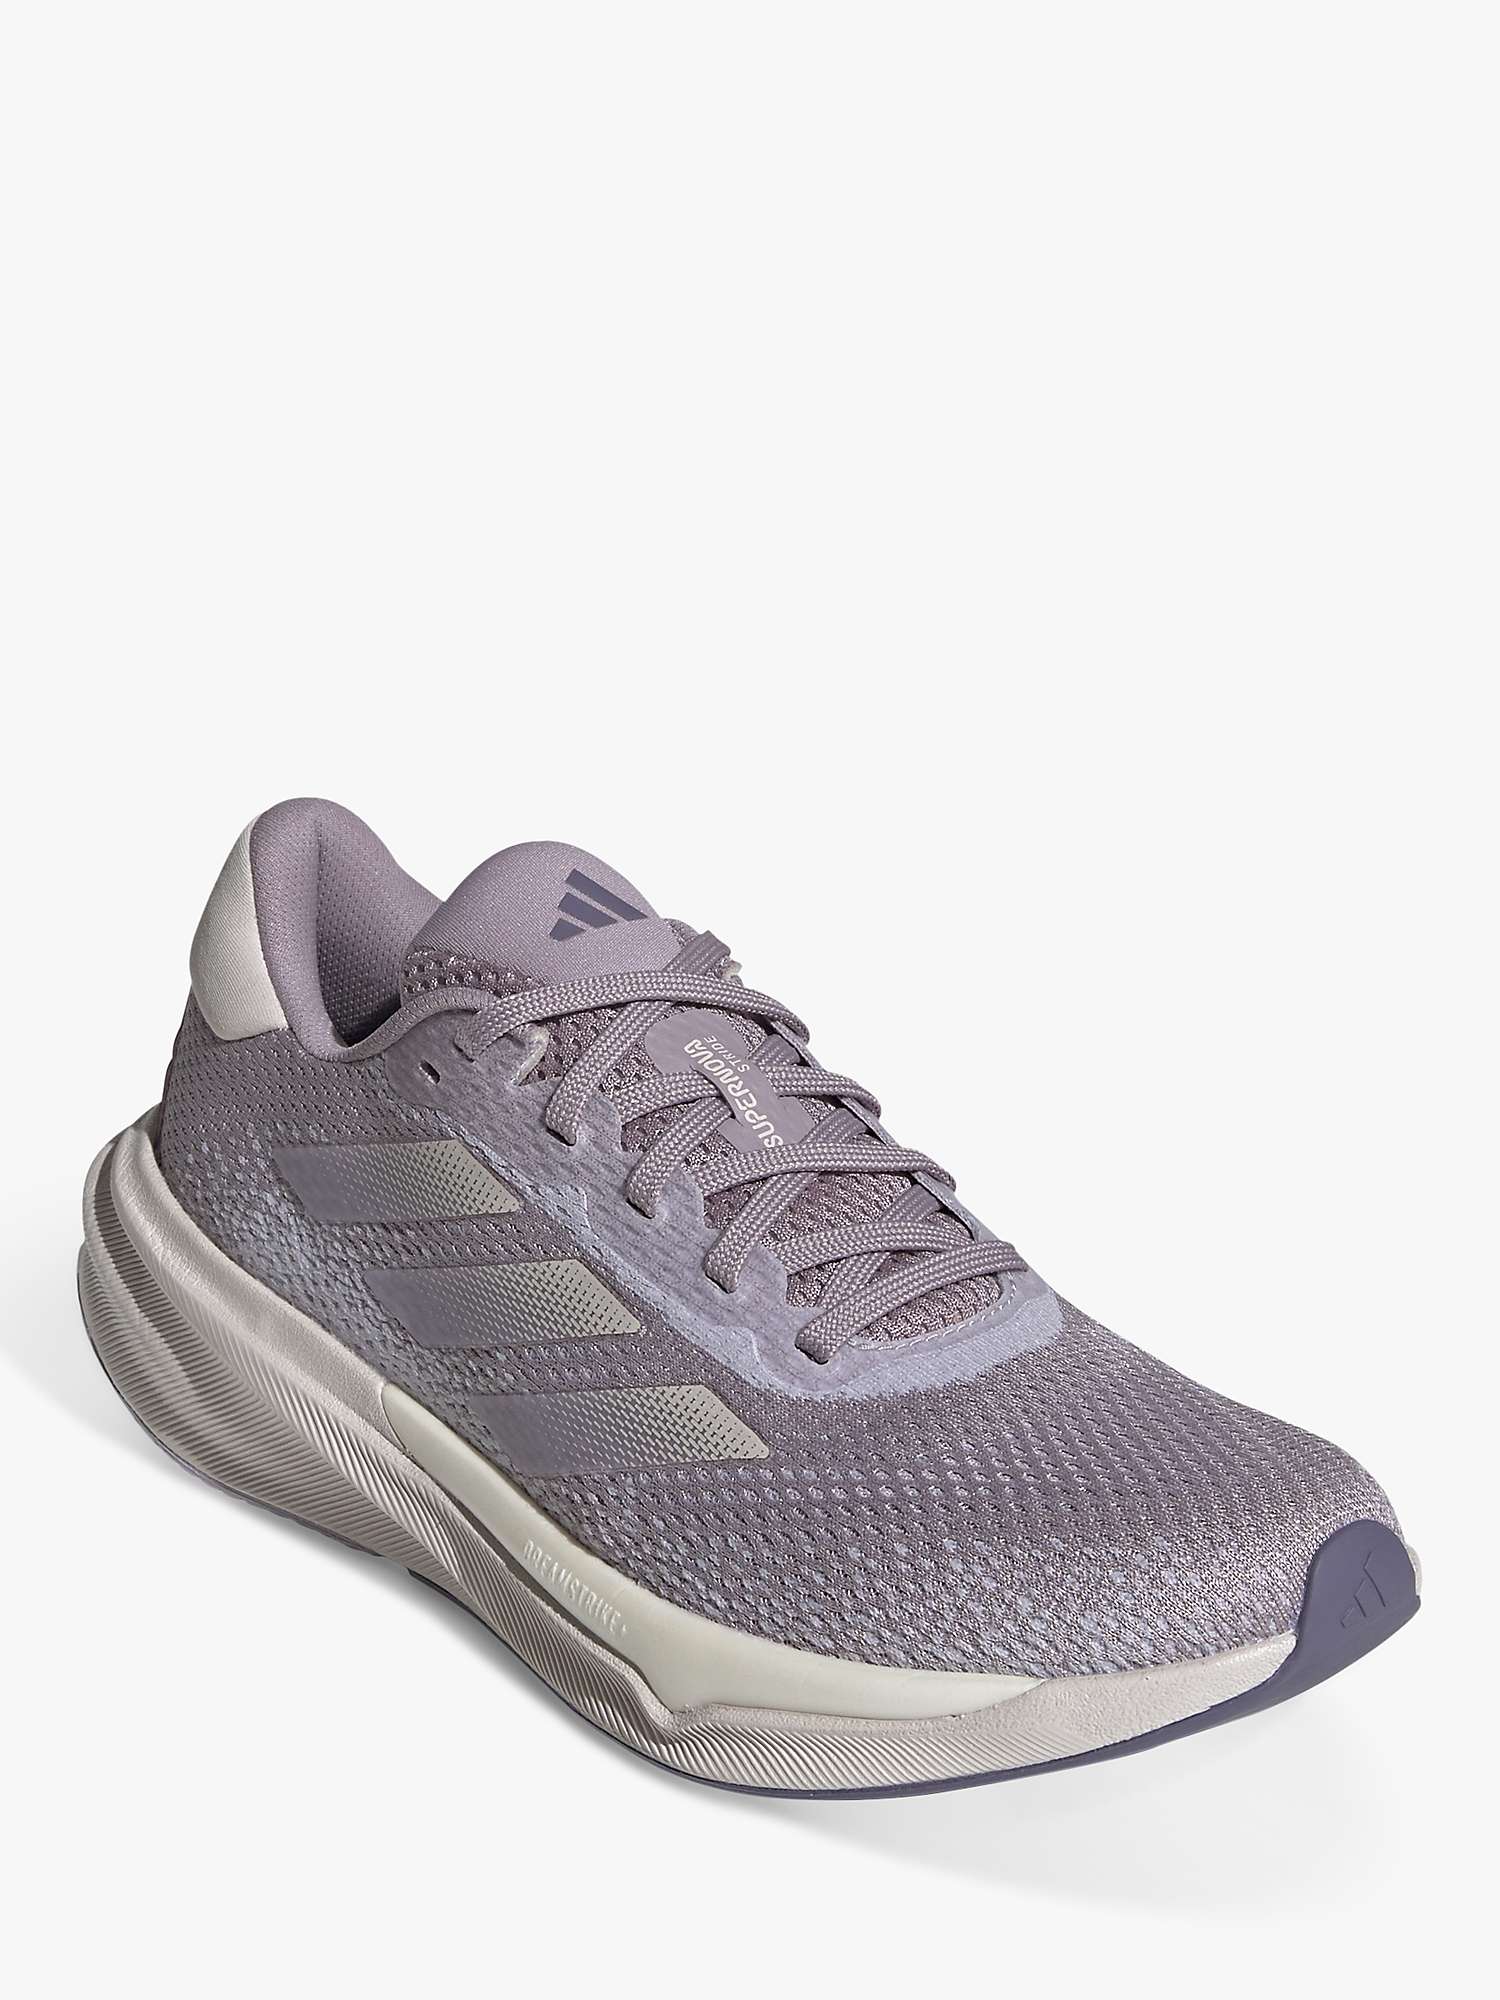 Buy adidas Supernova Stride Women's Sports Trainers Online at johnlewis.com